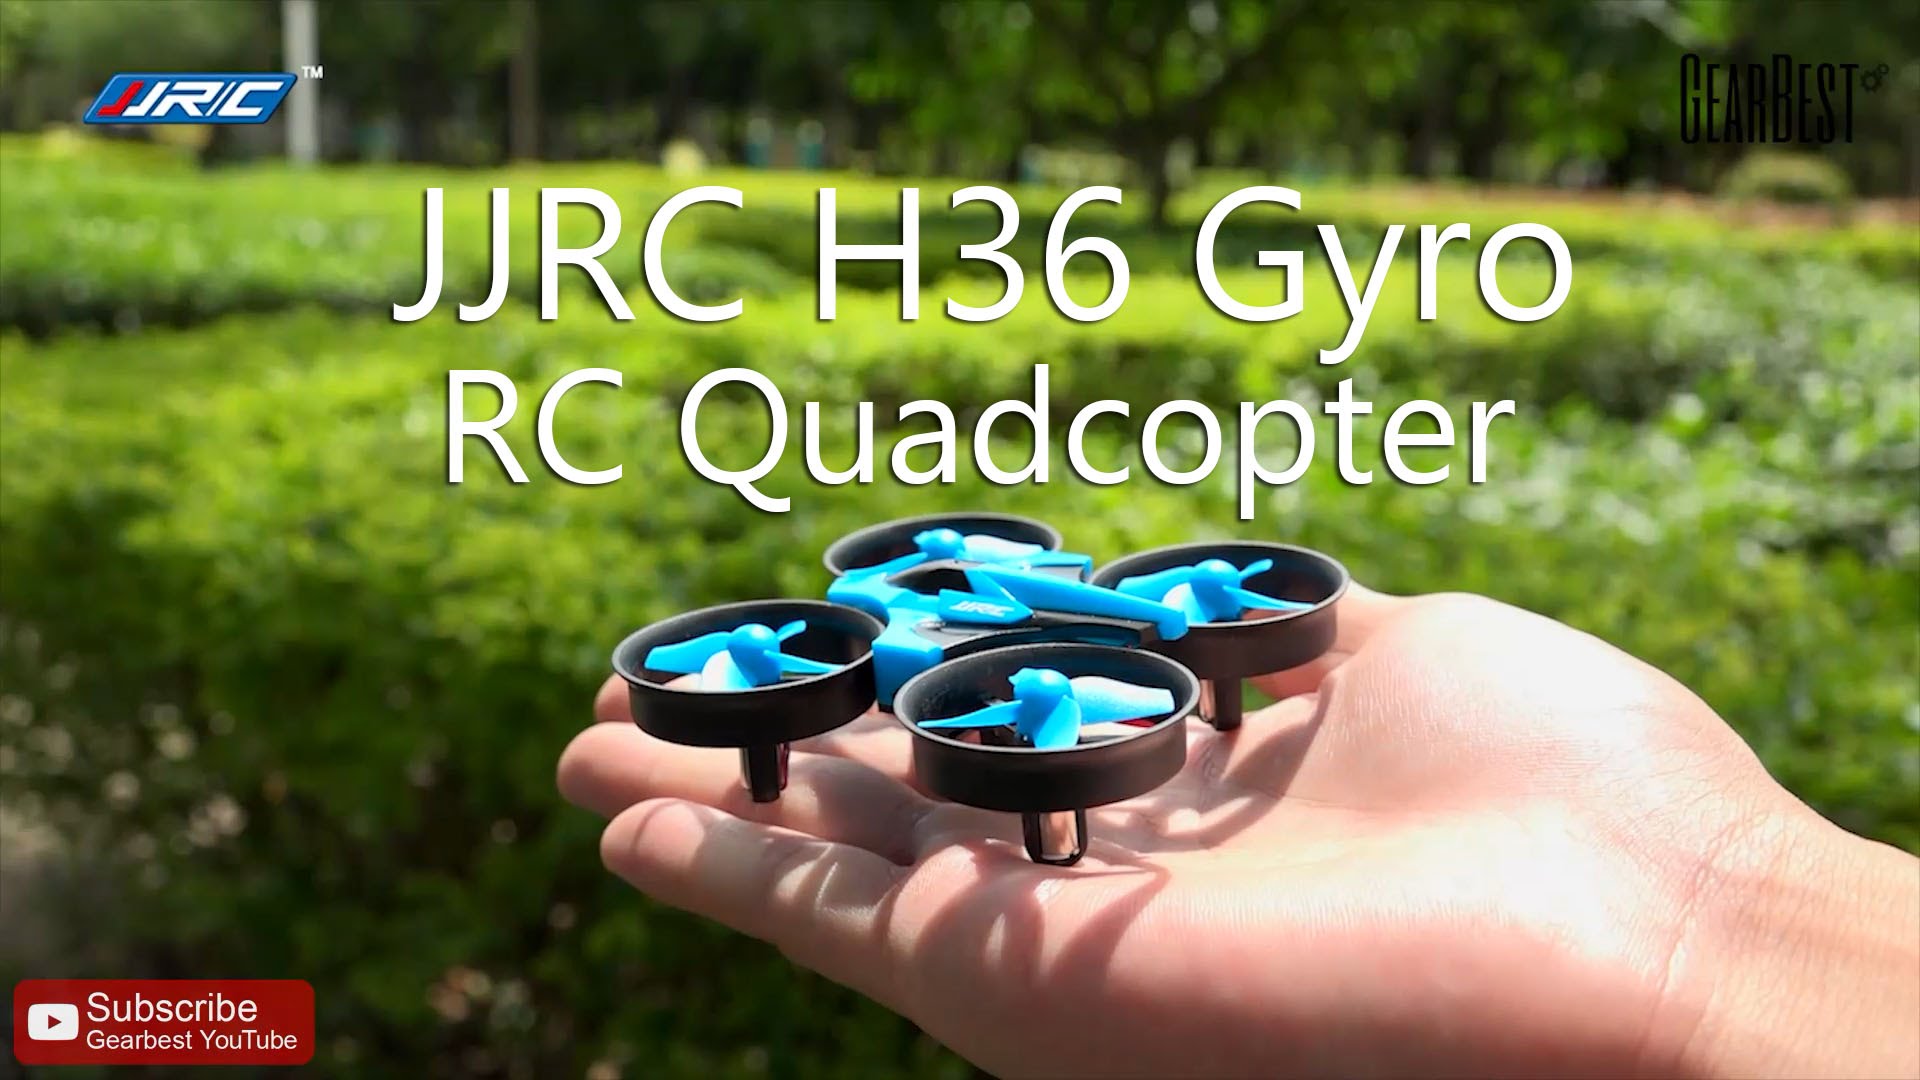 JJRC H36 4CH 6 Axis Gyro RC Quadcopter – Gearbest.com